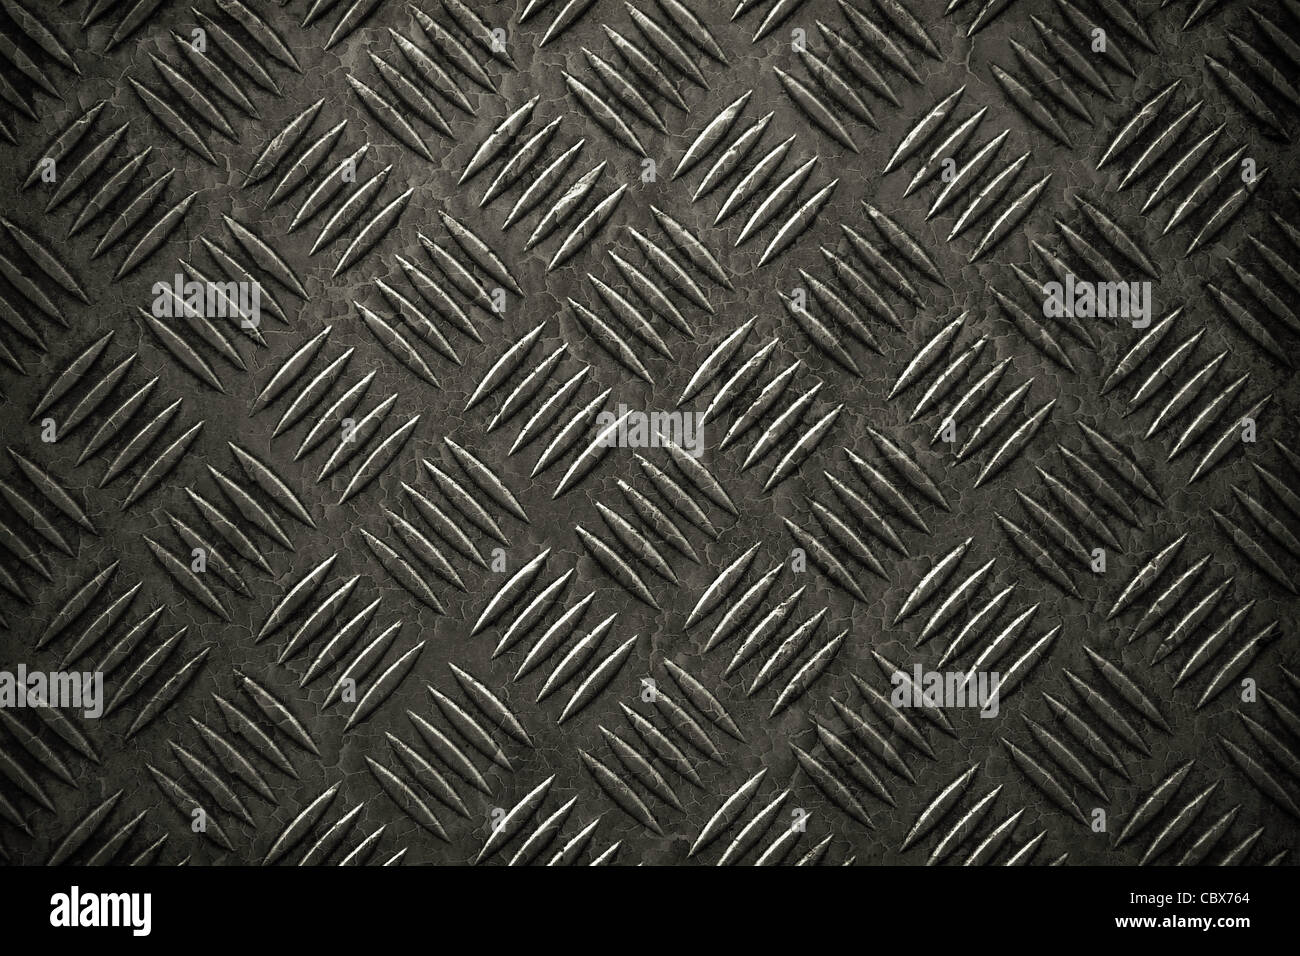 Metal surface as a background motive Stock Photo